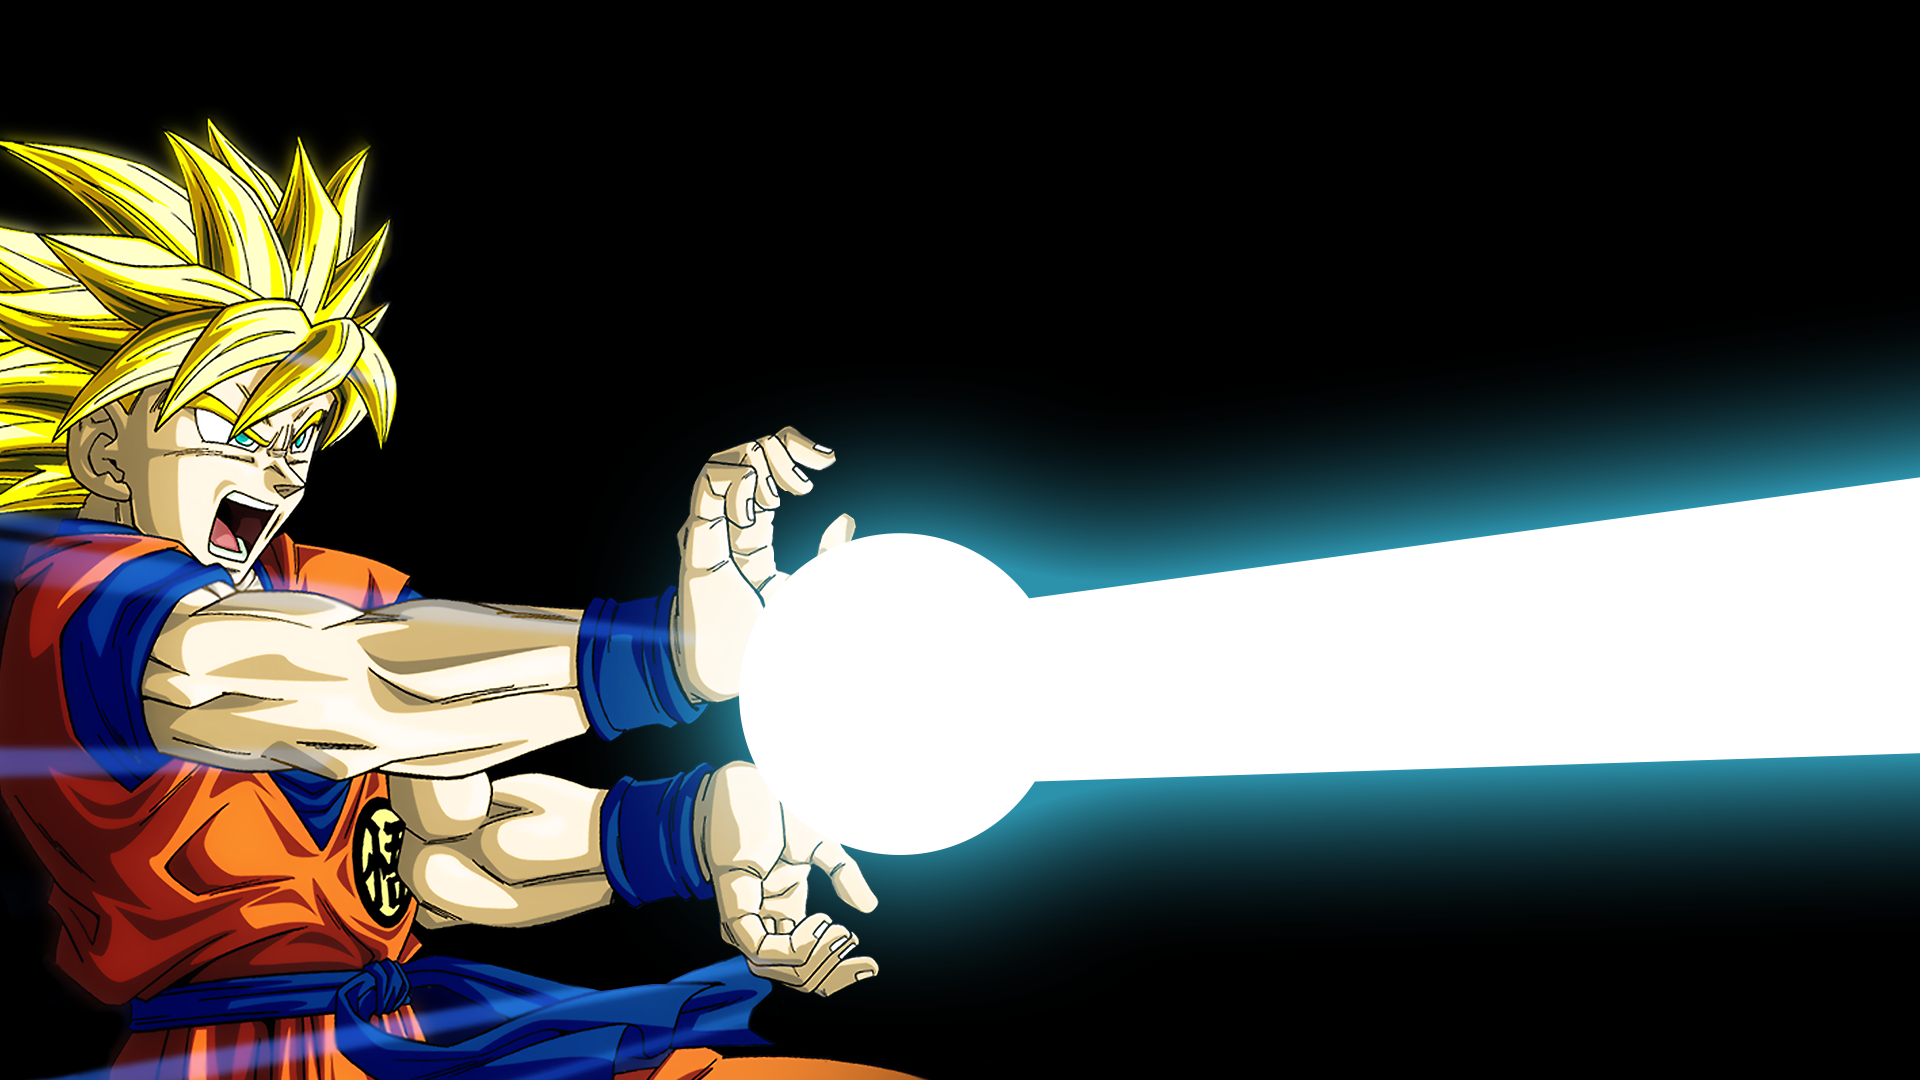 820+ Anime Dragon Ball Z HD Wallpapers and Backgrounds